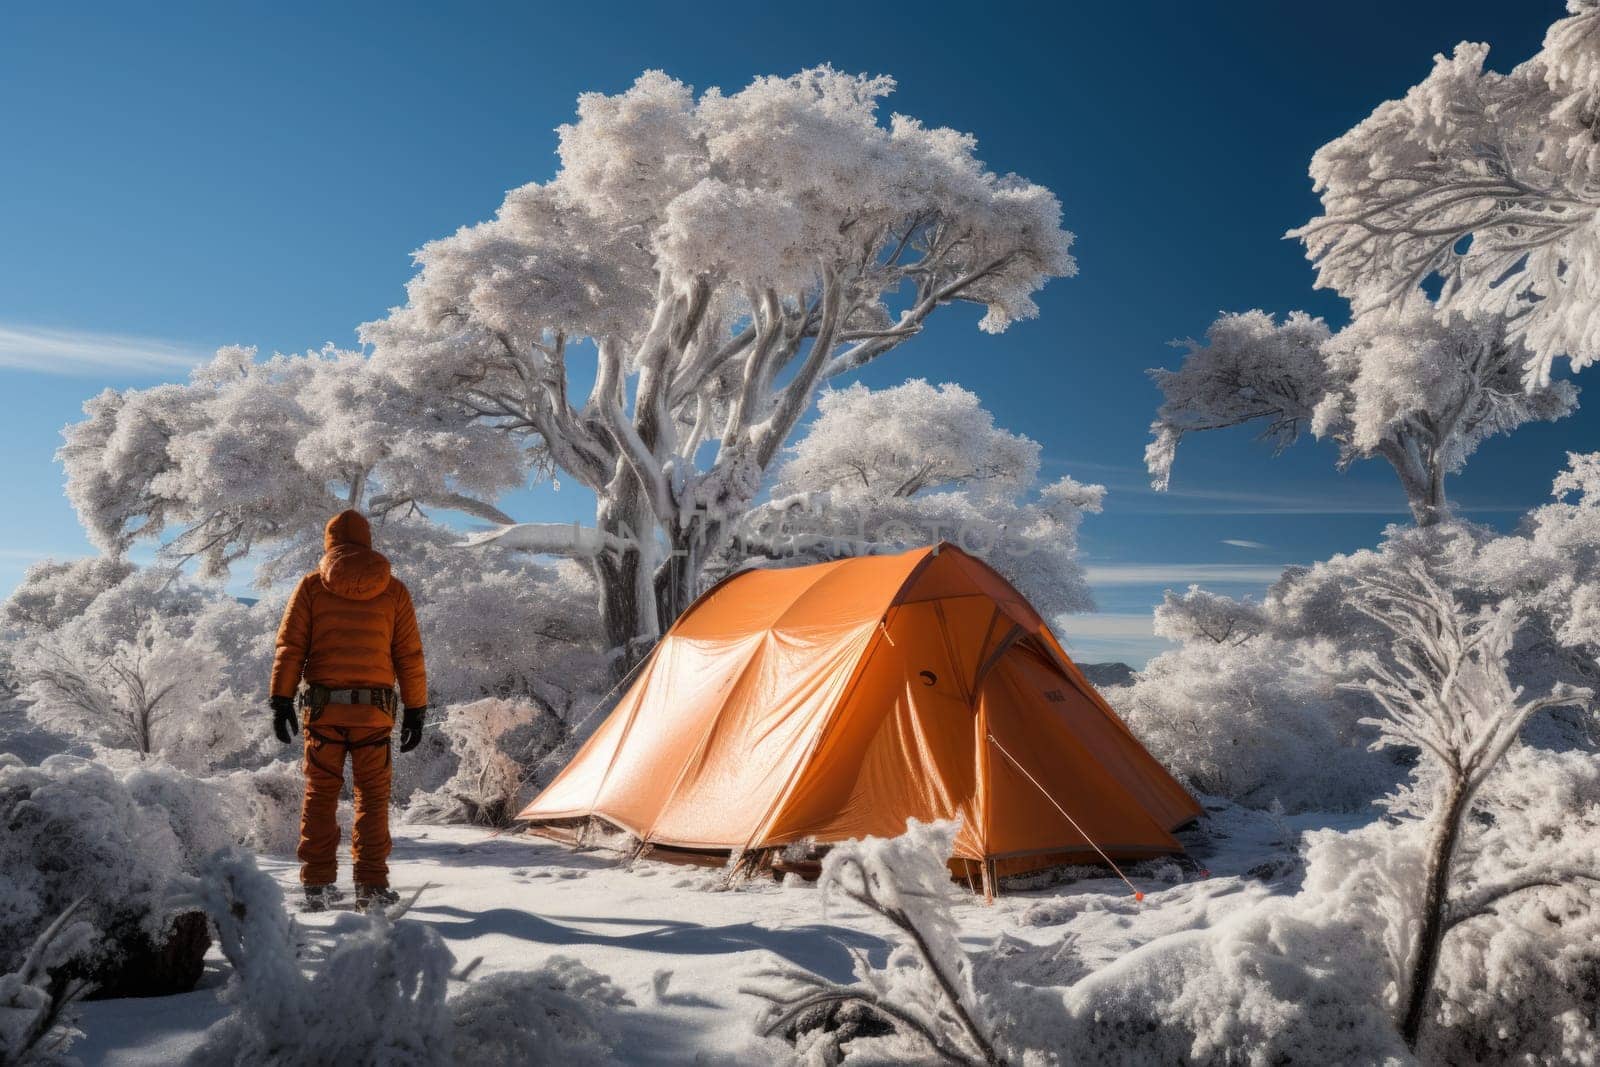 A person standing next to a tent in the snow, AI by starush